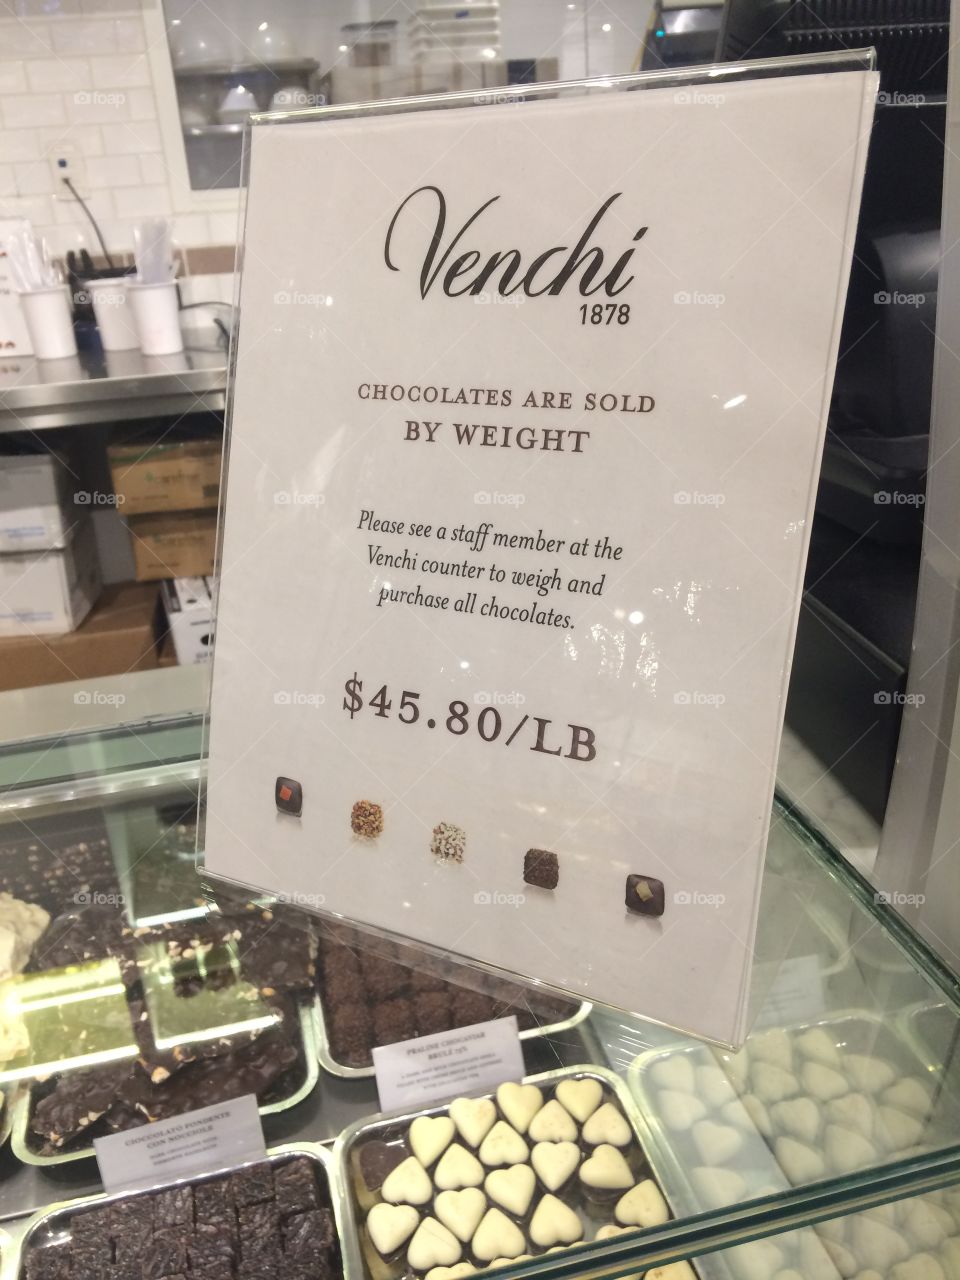 Chocolate in Eataly!
Chicago 2016